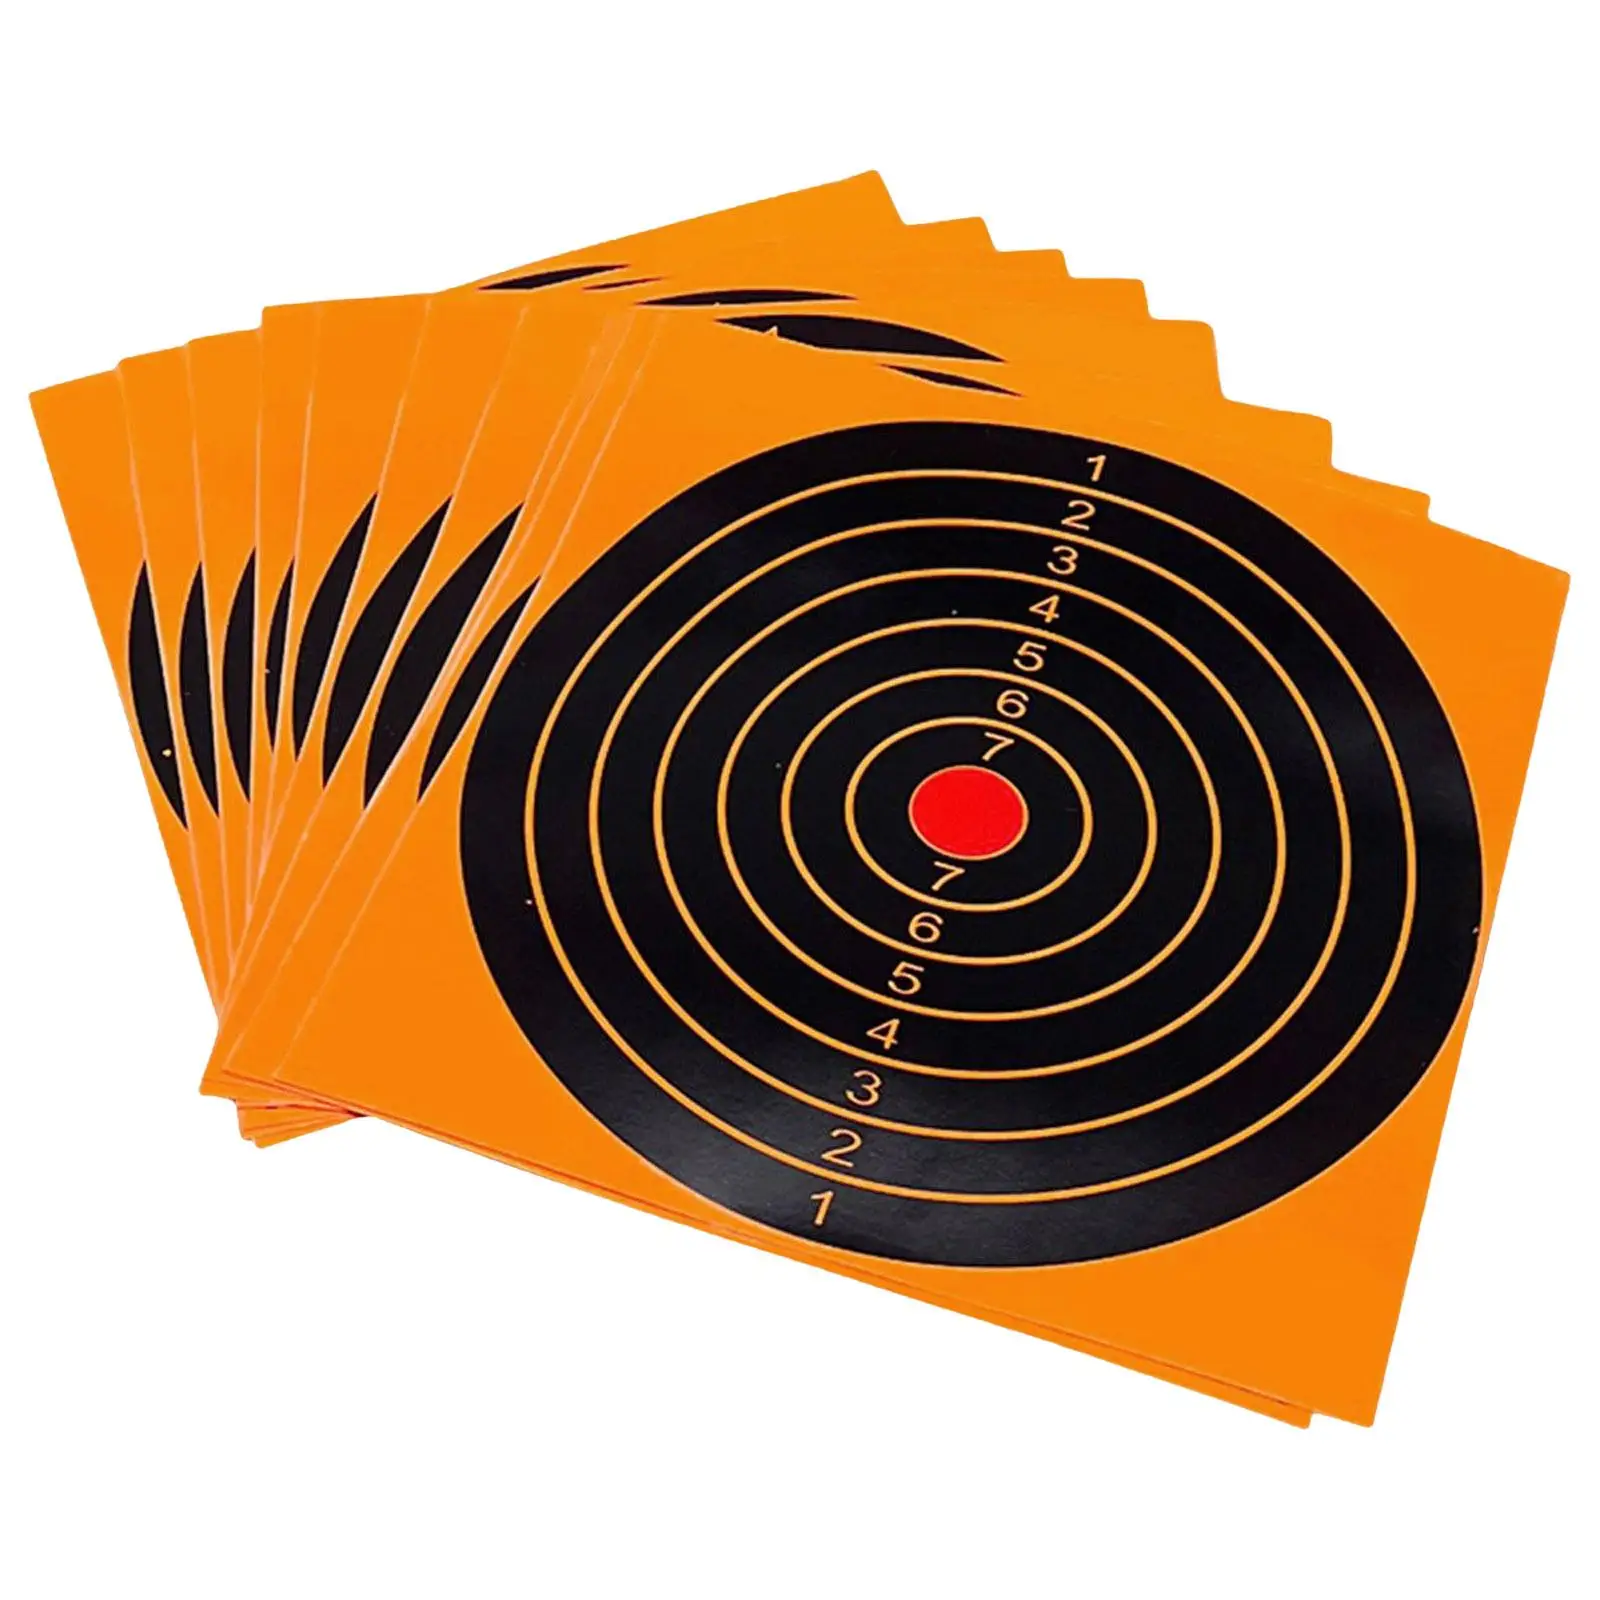 10x Self Adhesive Targets Stickers Reactive Target Shooting Exercise Training Round Targets Splatter Accessories